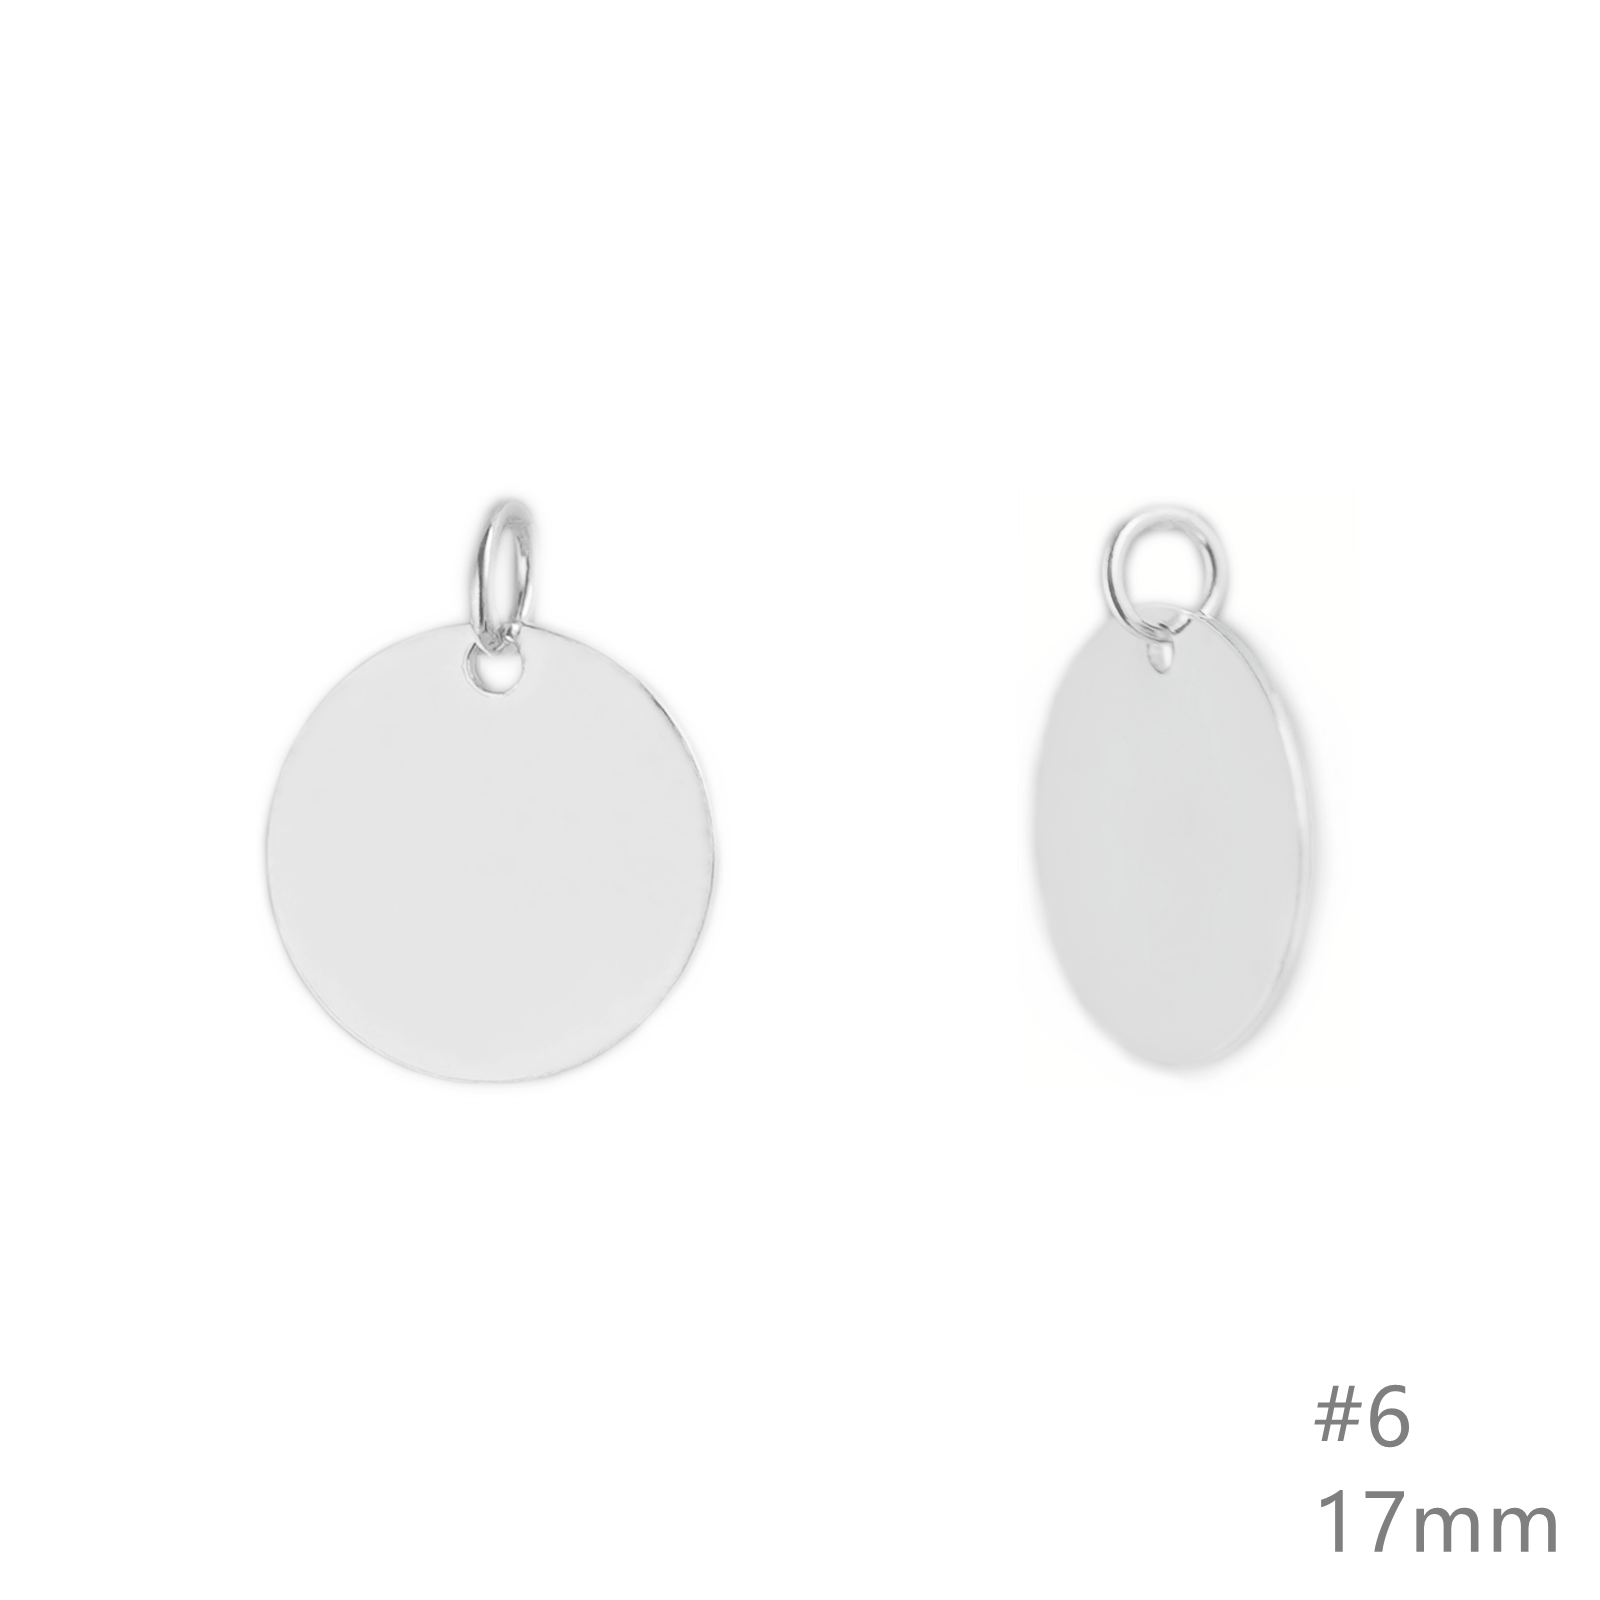 Sterling Silver Solid Pendant - Round Circle Disc, 8 - 20mm - sugarkittenlondon